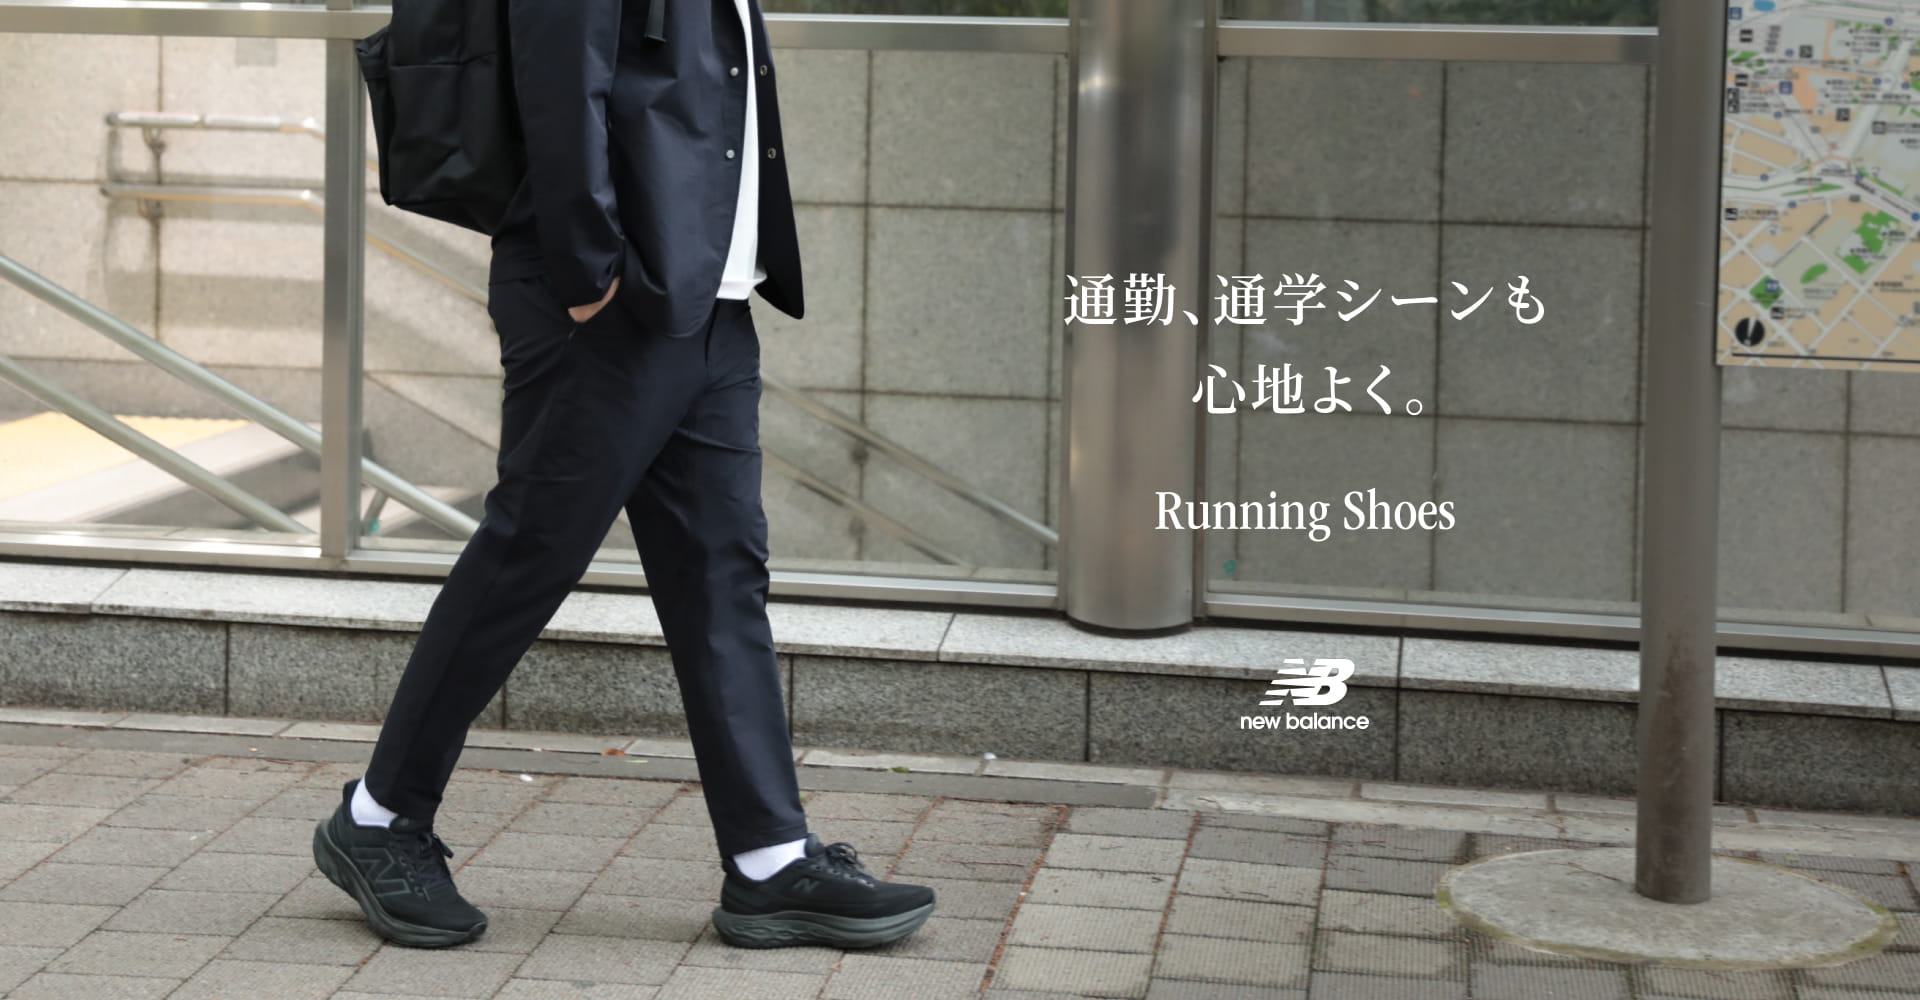 New Balance. Running Shoes. Comfortable for commuting to work or school.